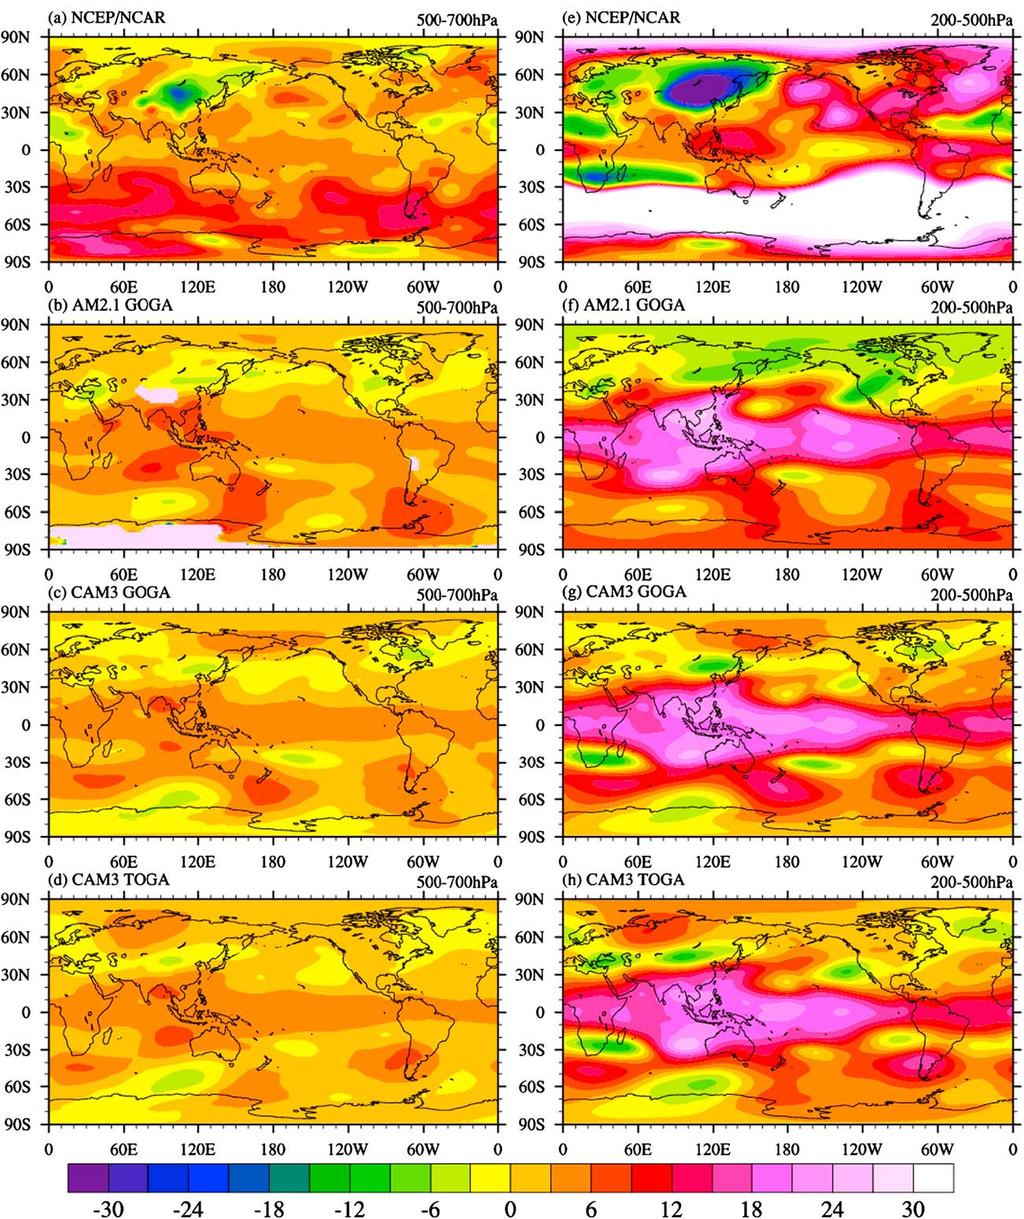 Figure B1. The decadal changes (1977 2000 minus 1950 1976) in the JJA layer thickness (in gpm) for (left) 500 700 hpa and (right) 200 500 hpa layers from (a, e) NCEP/NCAR reanalysis, (b, f) GFDL AM2.